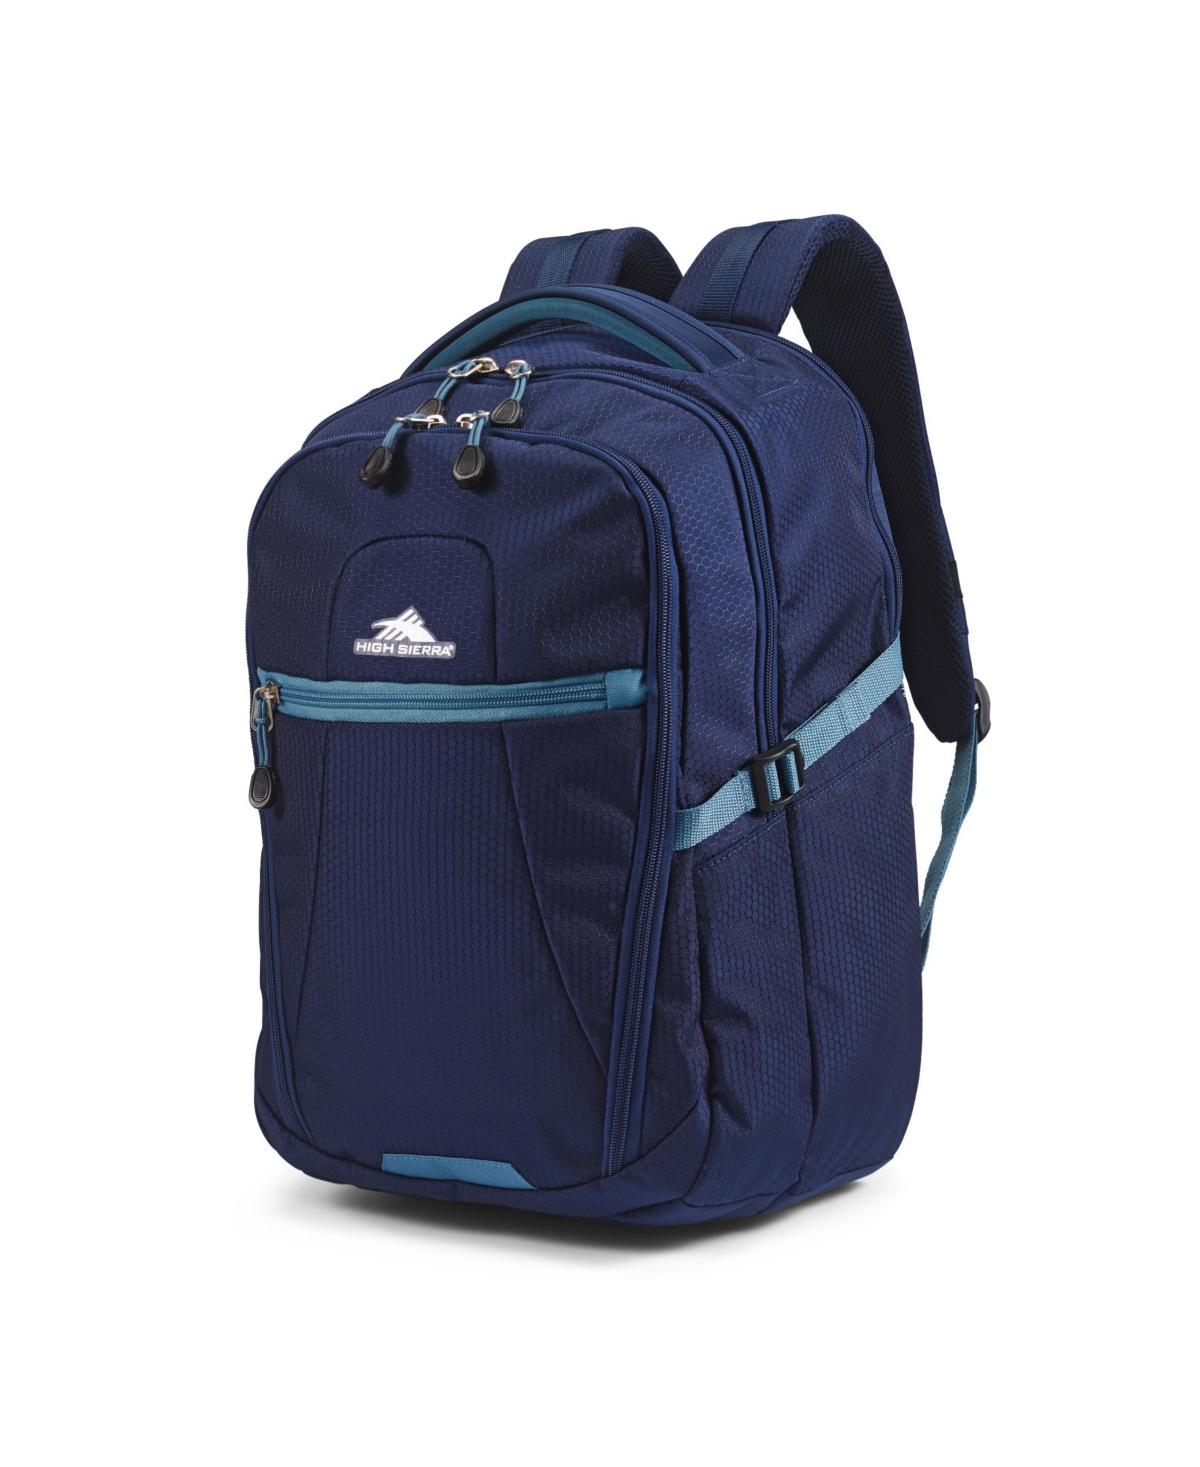 Fairlead Computer Backpack - True Navy and Graphite Blue